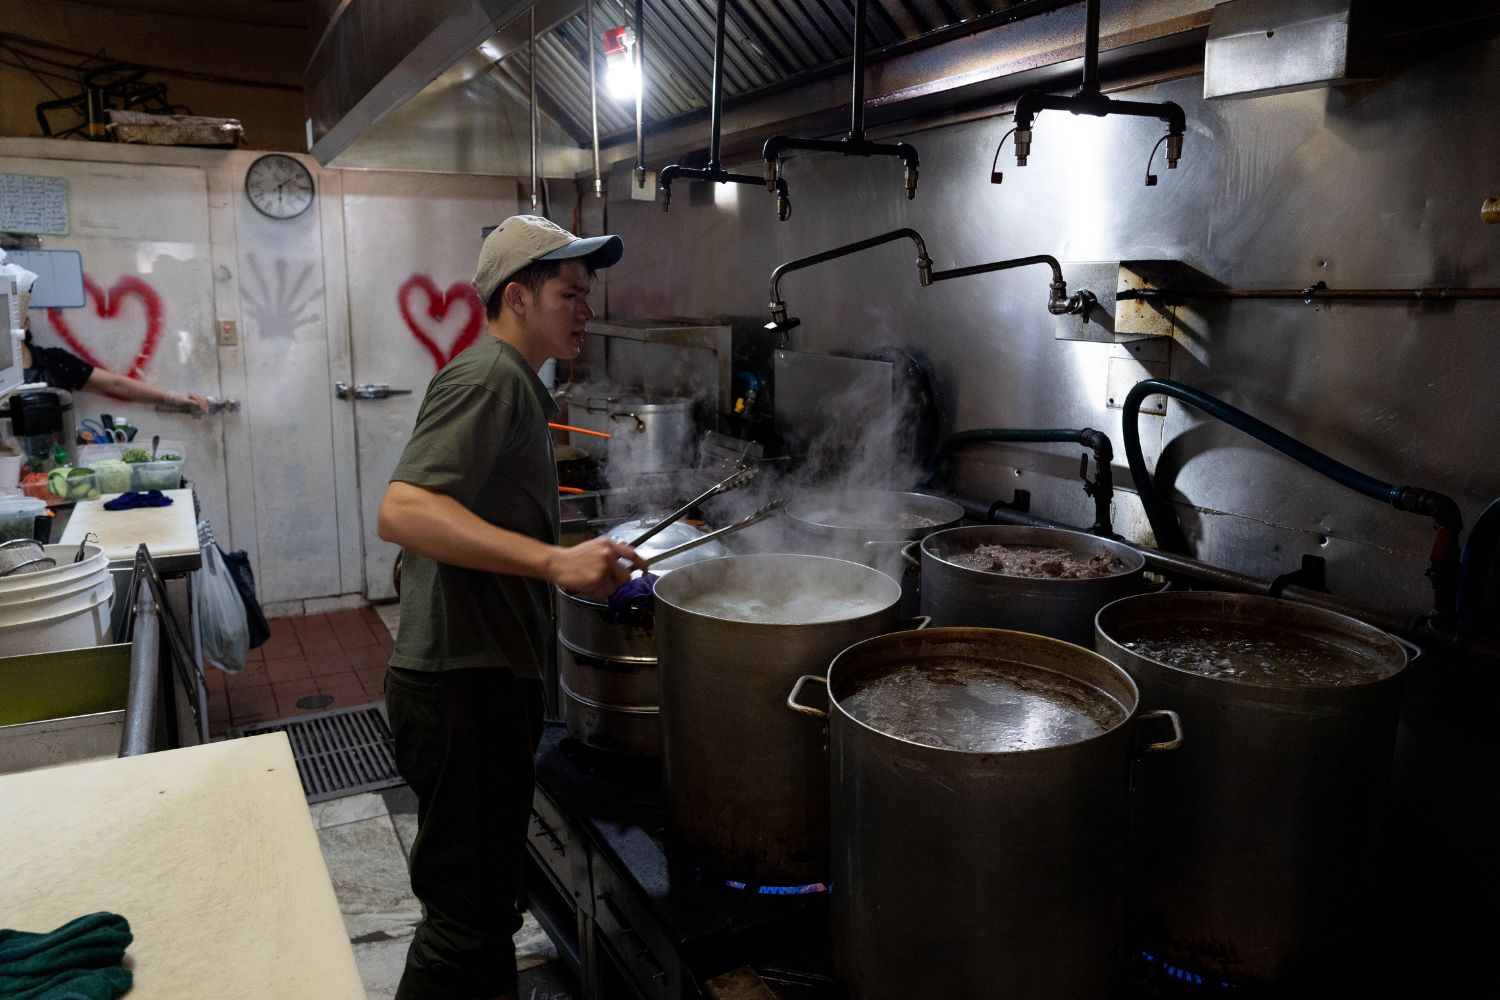 "We don't use store-bought broth” says Hoa Quan. “We make our own here."